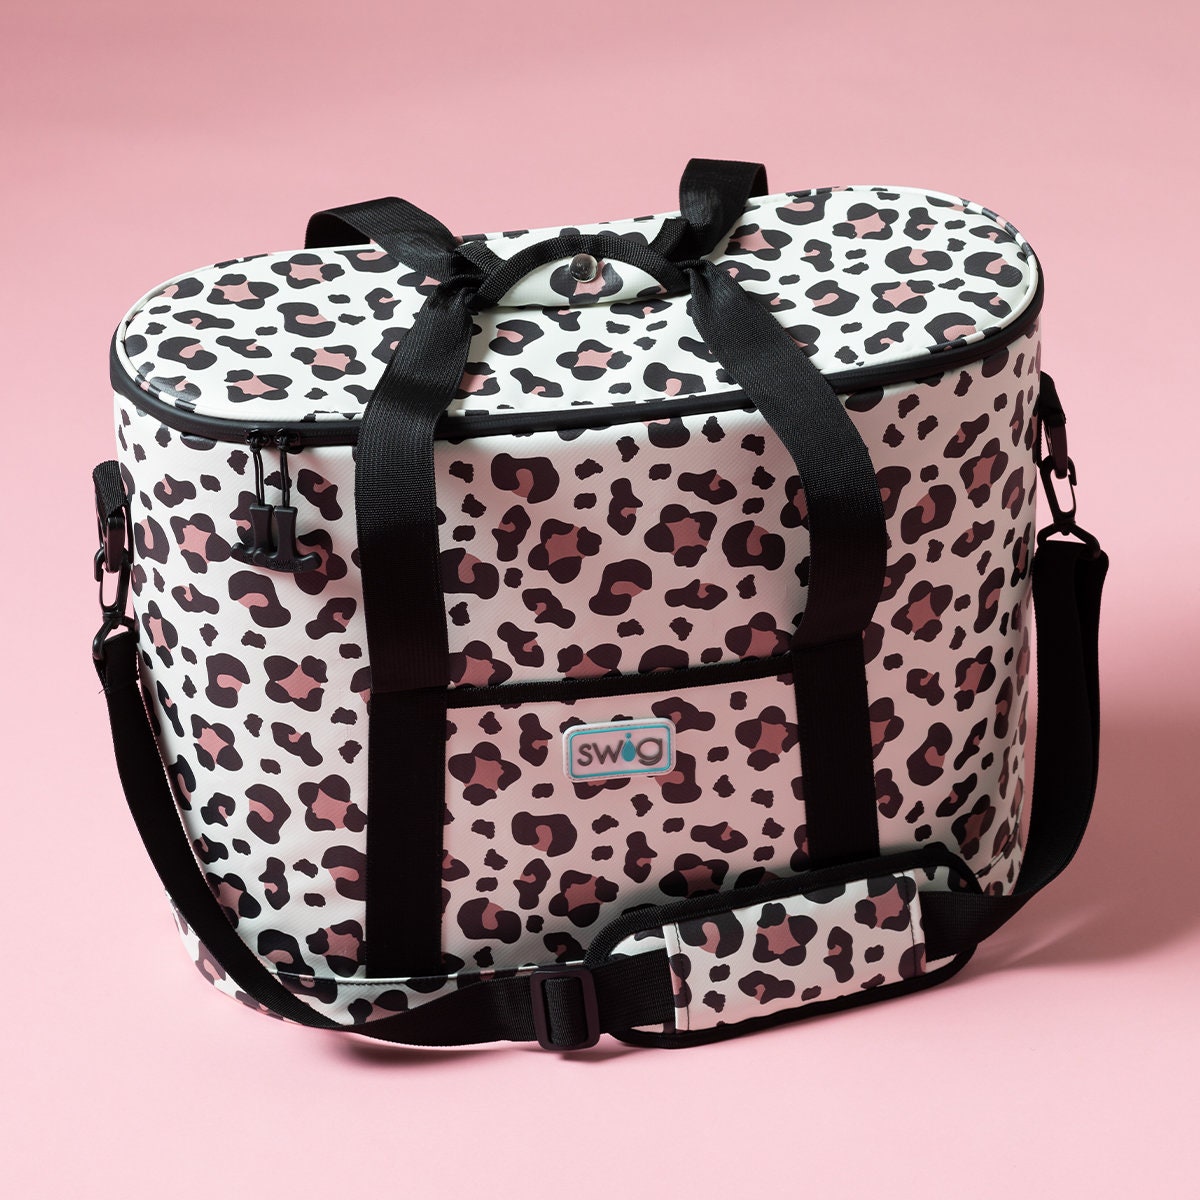 SWIG - Dreamsicle Packi 12 Cooler – The Pink Leopard